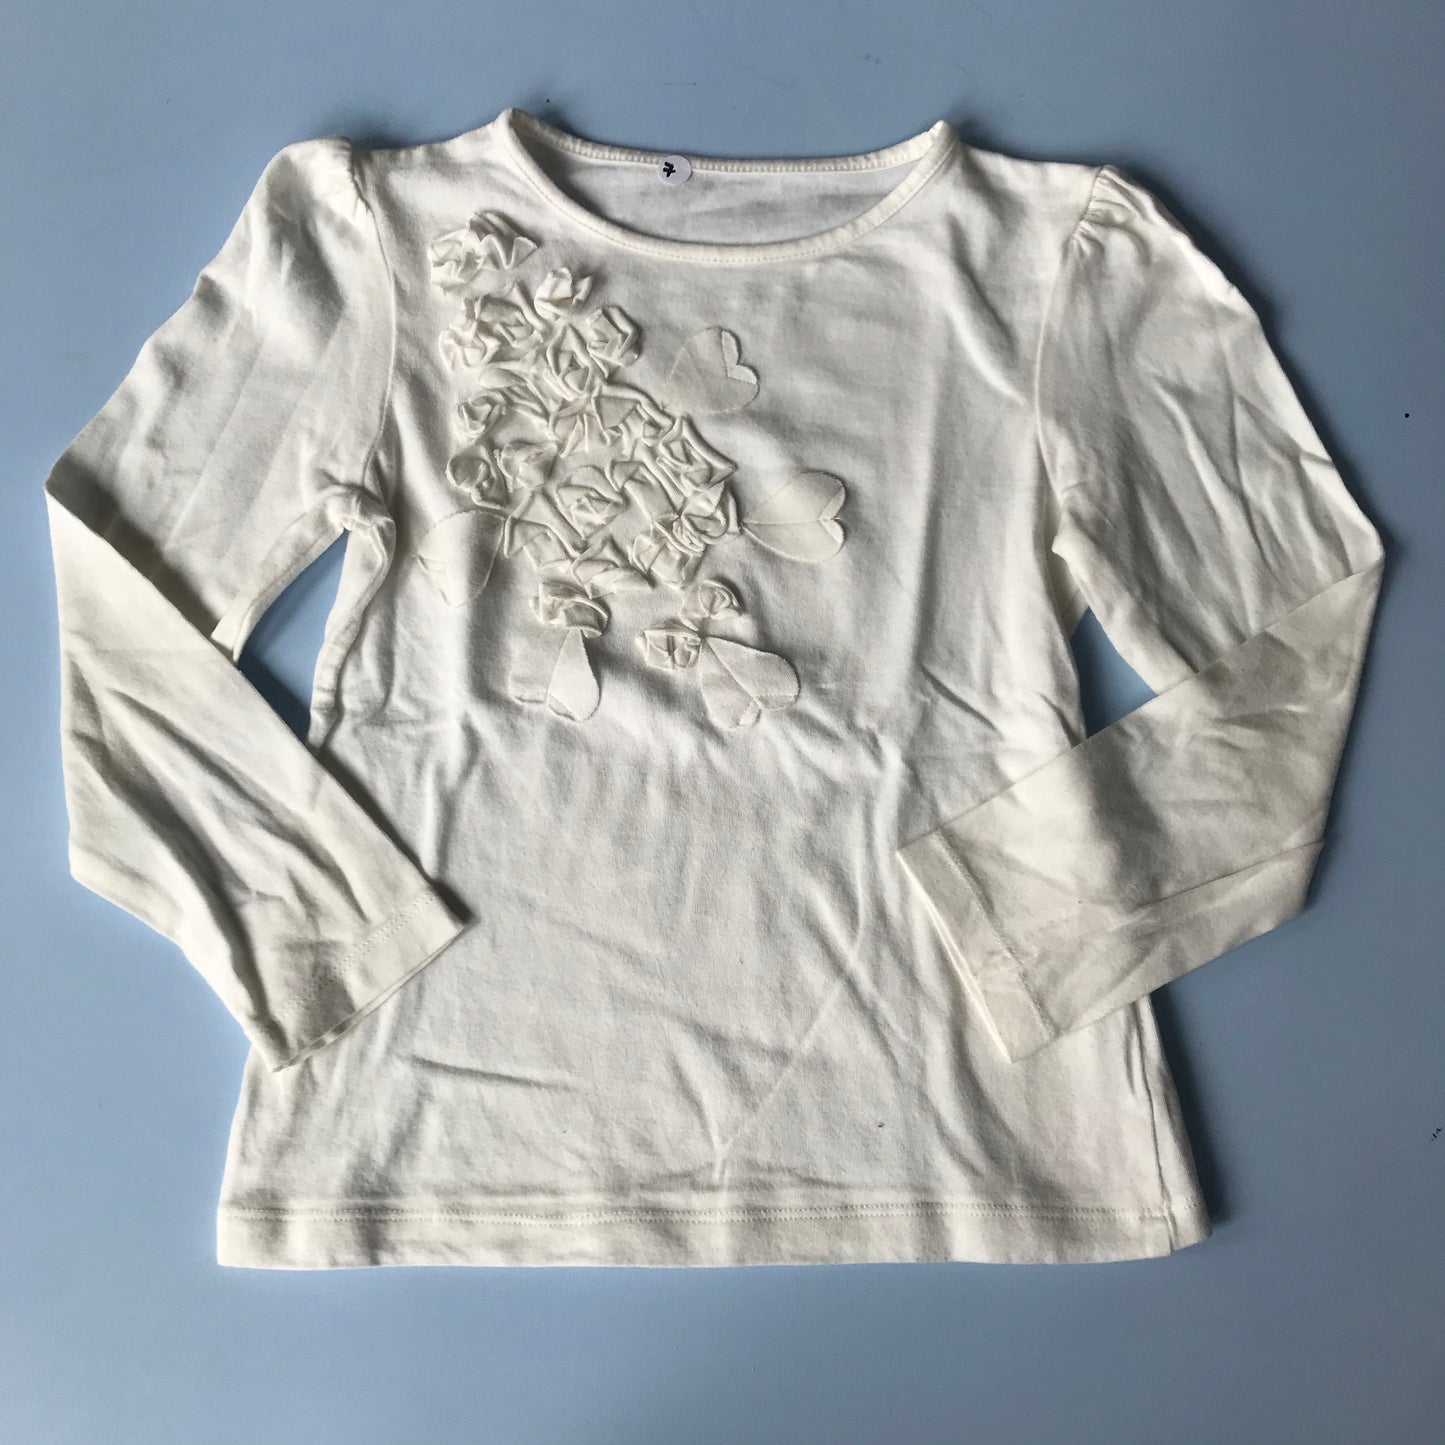 T-shirt - White with frill detail - Age 7